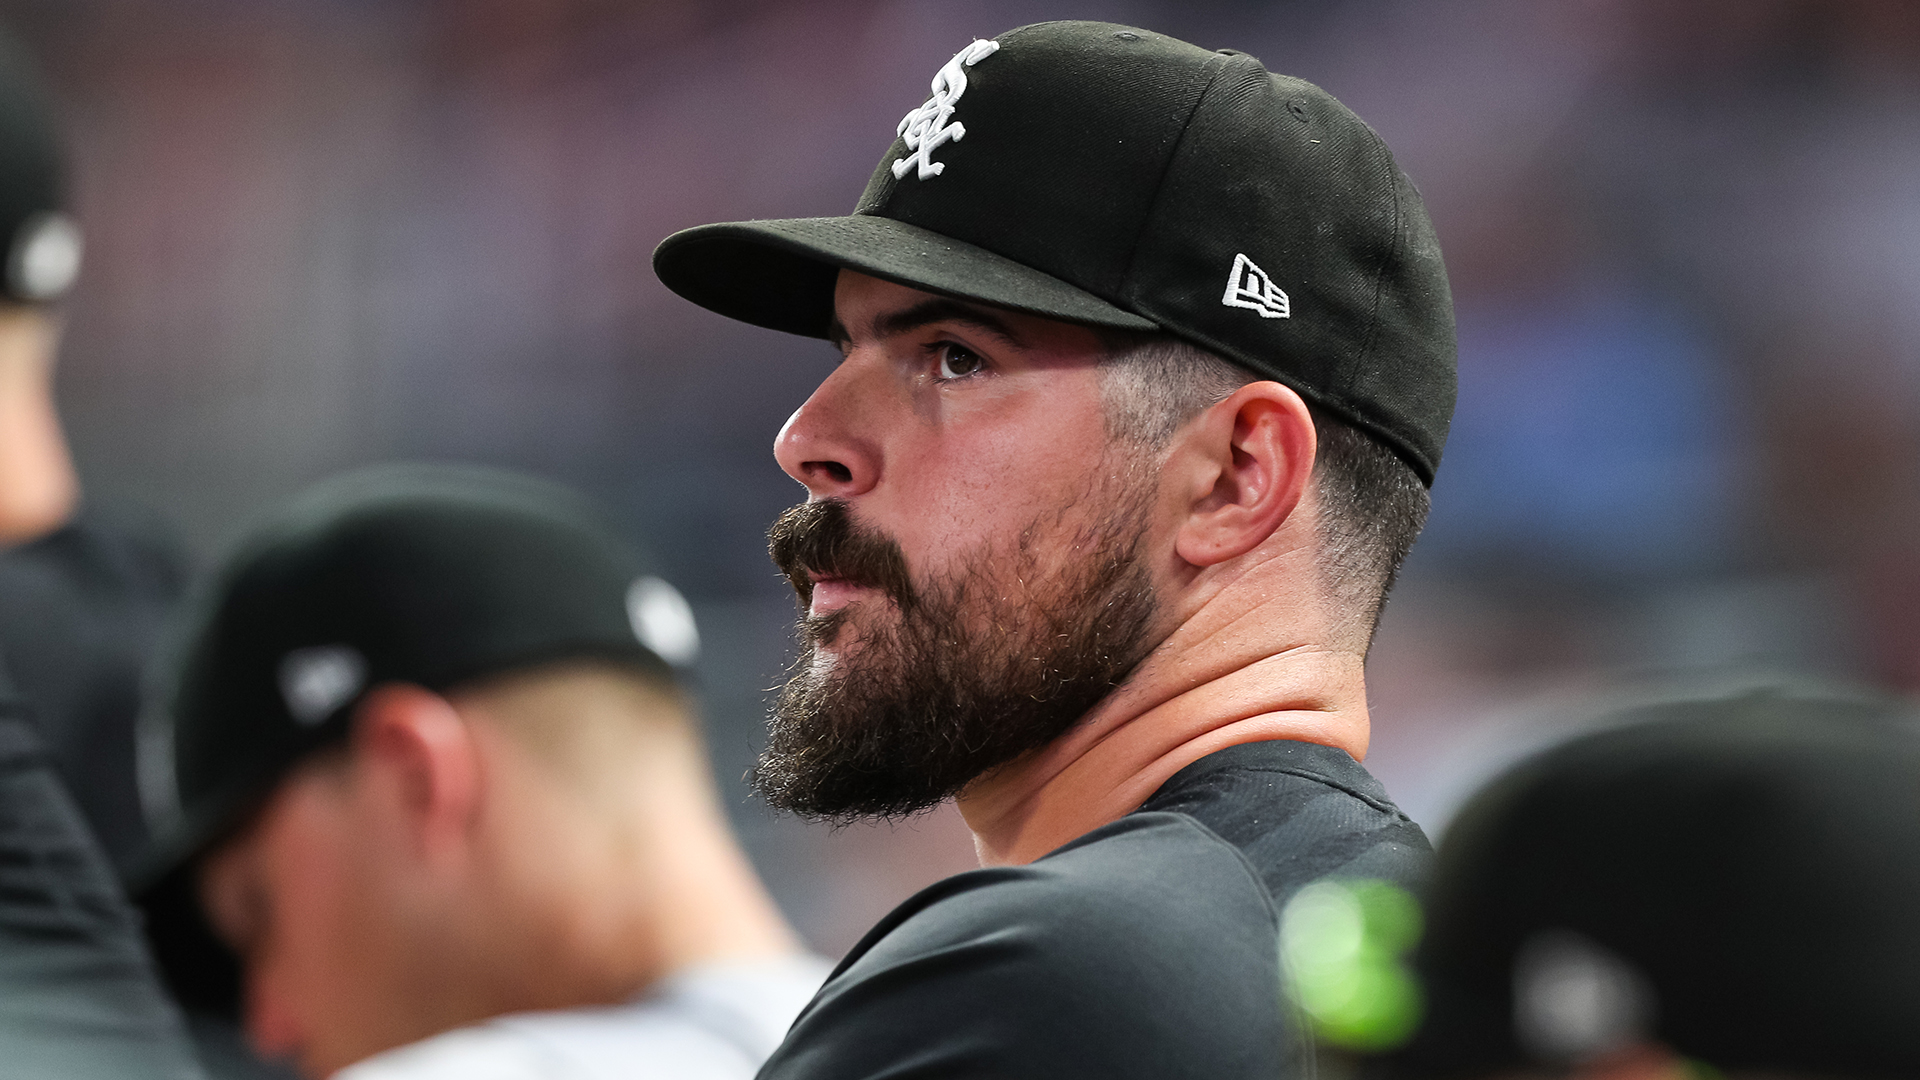 The Yankees' Facial Hair Policy and New York Law - Beyond the Box